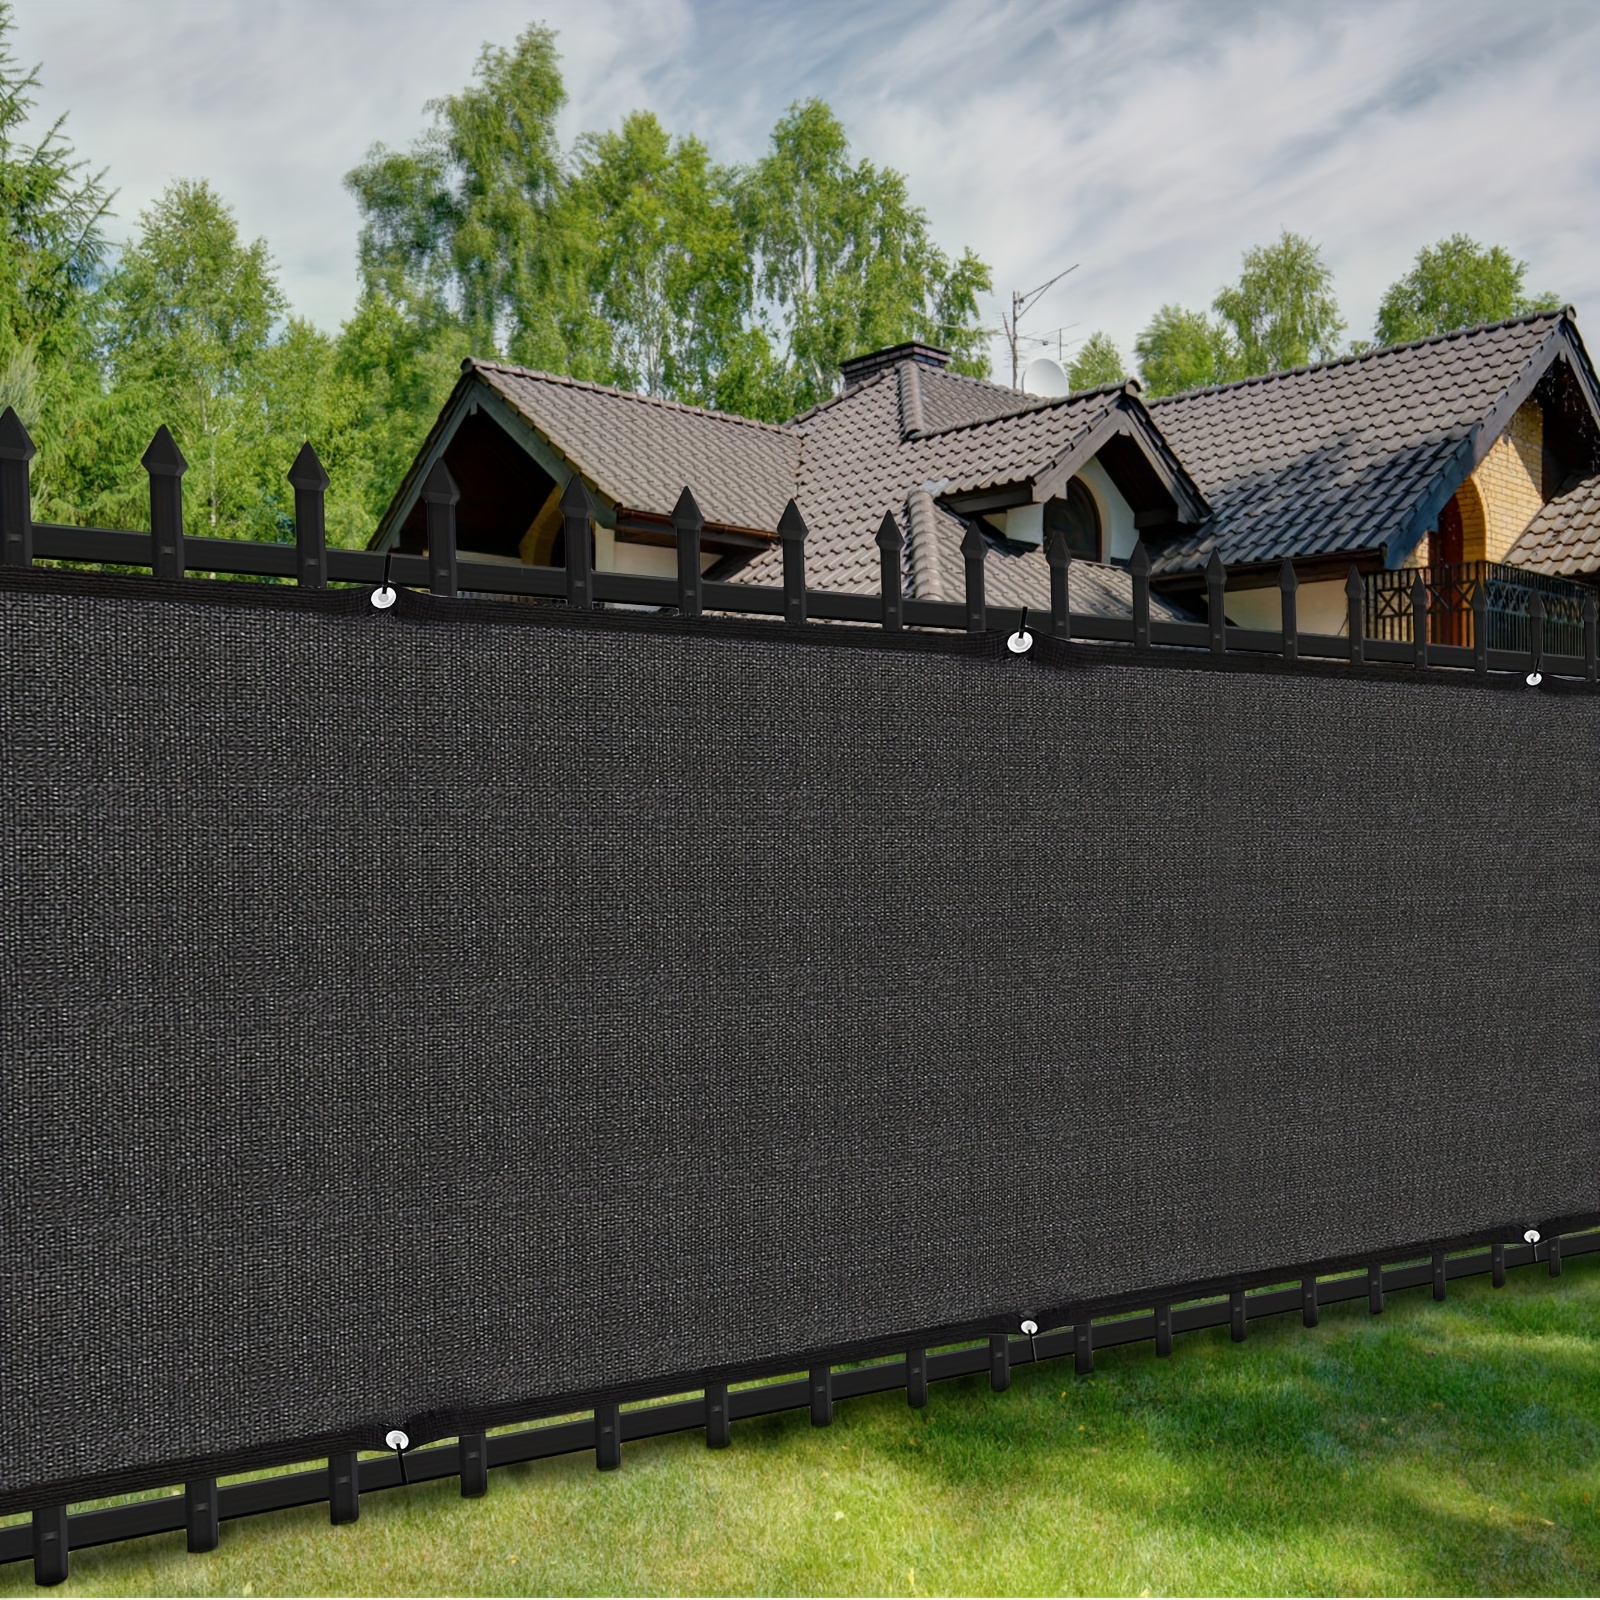 

1pc Privacy Screen Fence Mesh Windscreen For Backyard Deck Patio Balcony, Heavy-duty Vinyl With Brass Grommets, 90% Uv Blockage & Zip Ties Included, Outdoor Fencing Cover